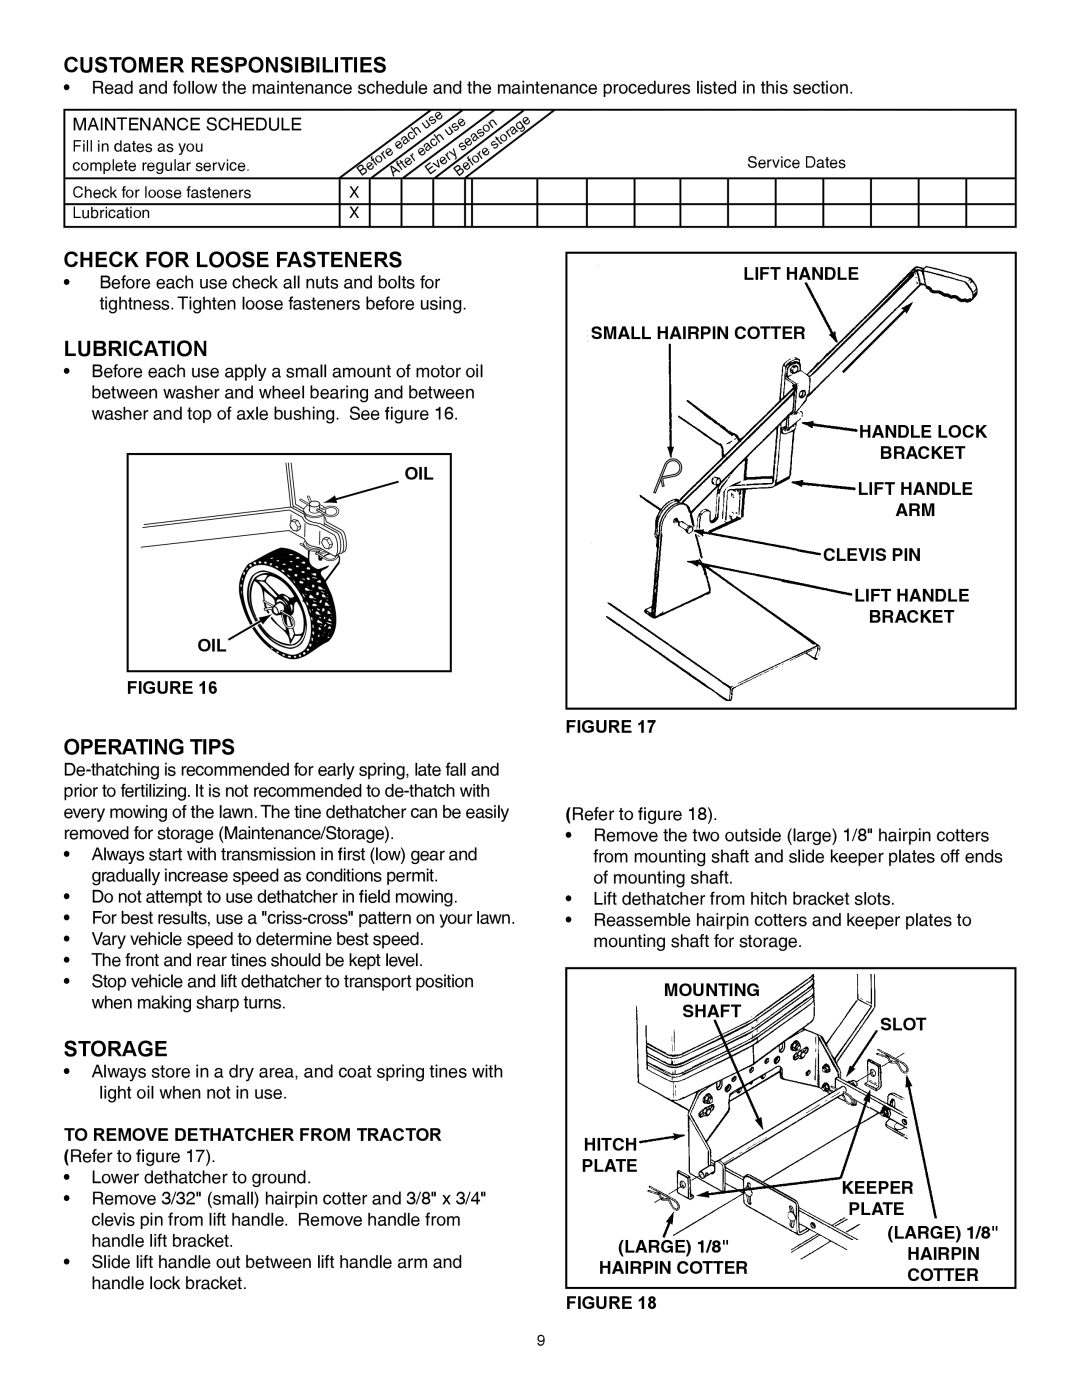 Sears 45-04381 owner manual Customer Responsibilities, Check For Loose Fasteners, Lubrication, Operating Tips, Storage 